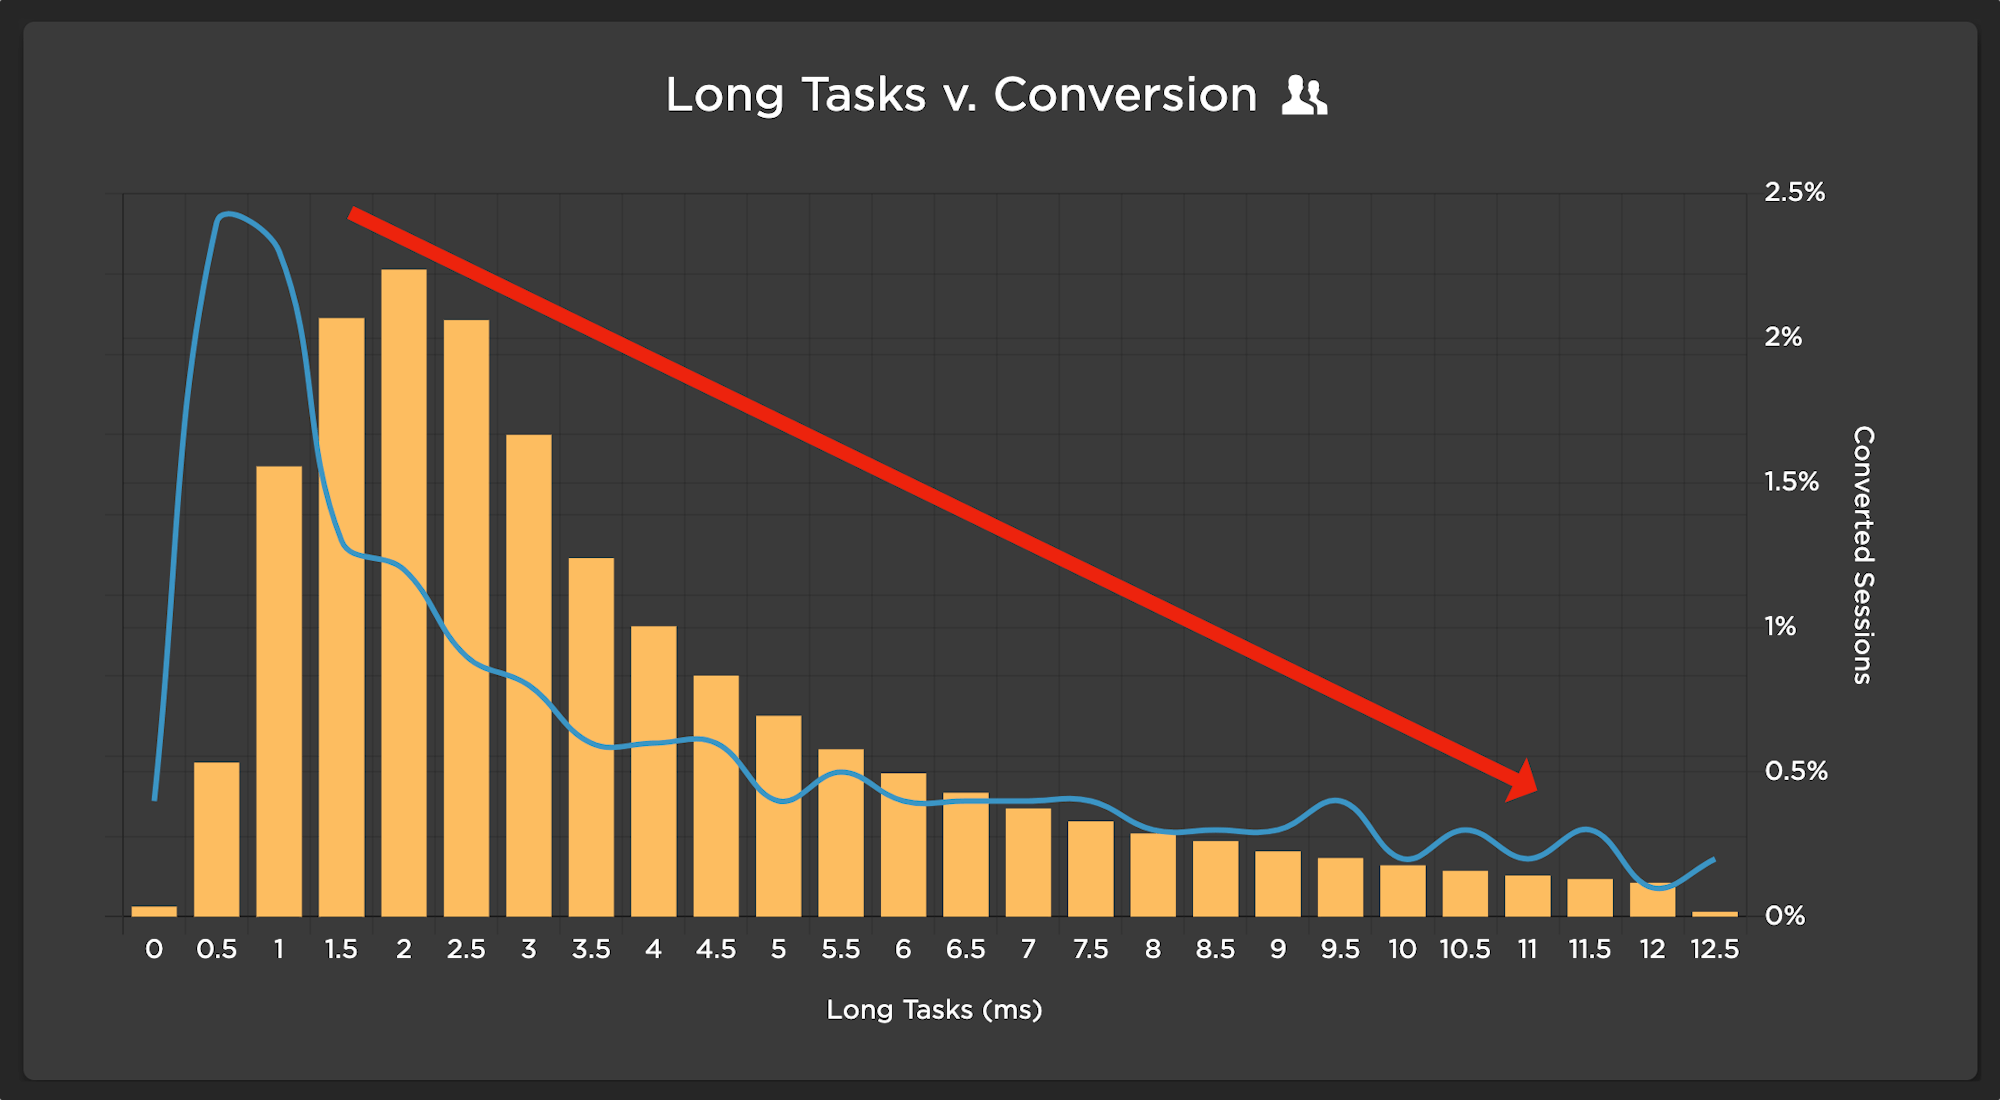 Chart showing strong correlation between long tasks and conversion